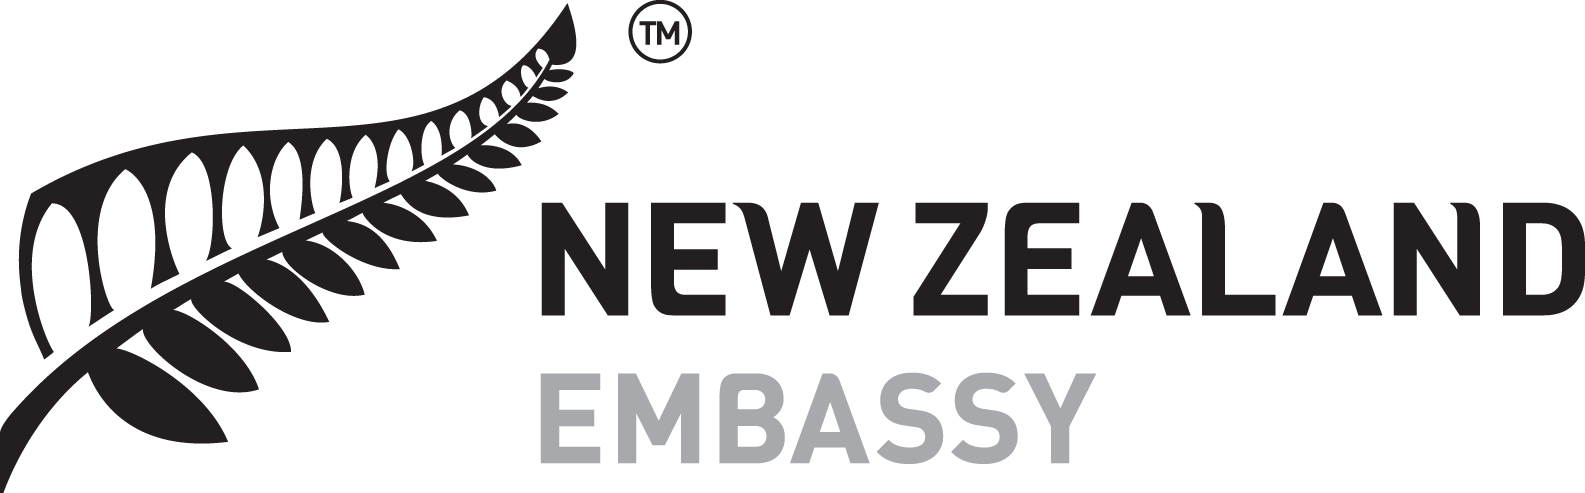 Embassy Logo - Logos | New Zealand Ministry of Foreign Affairs and Trade